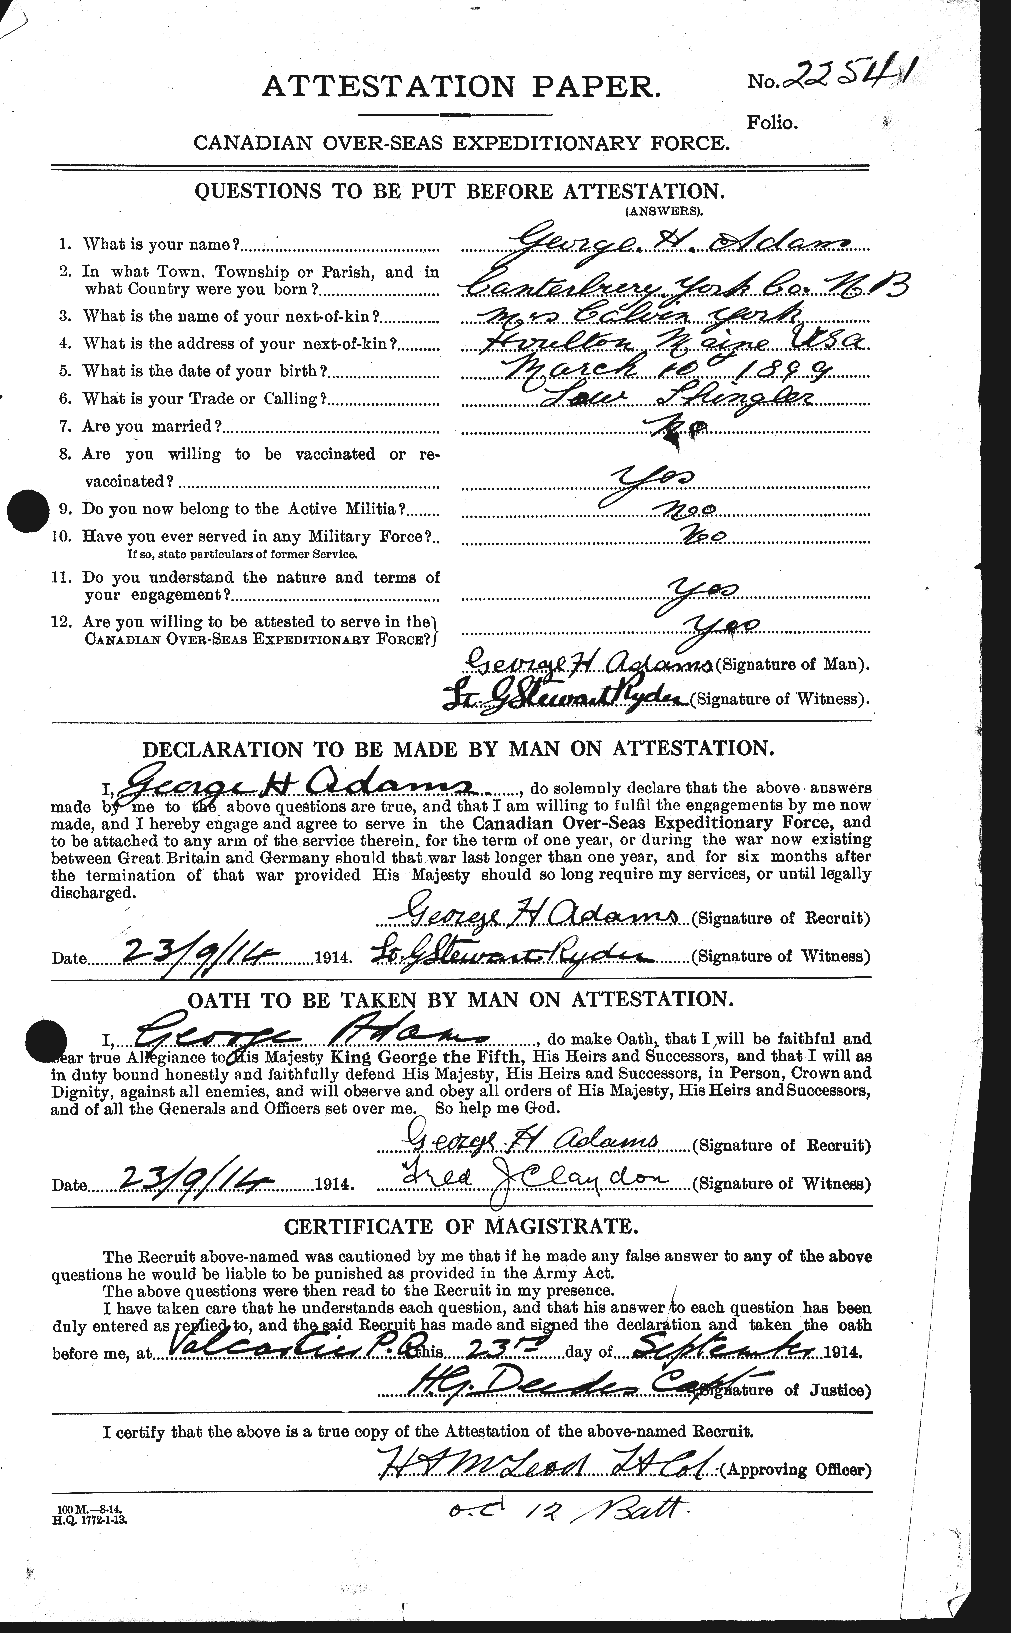 Personnel Records of the First World War - CEF 202566a